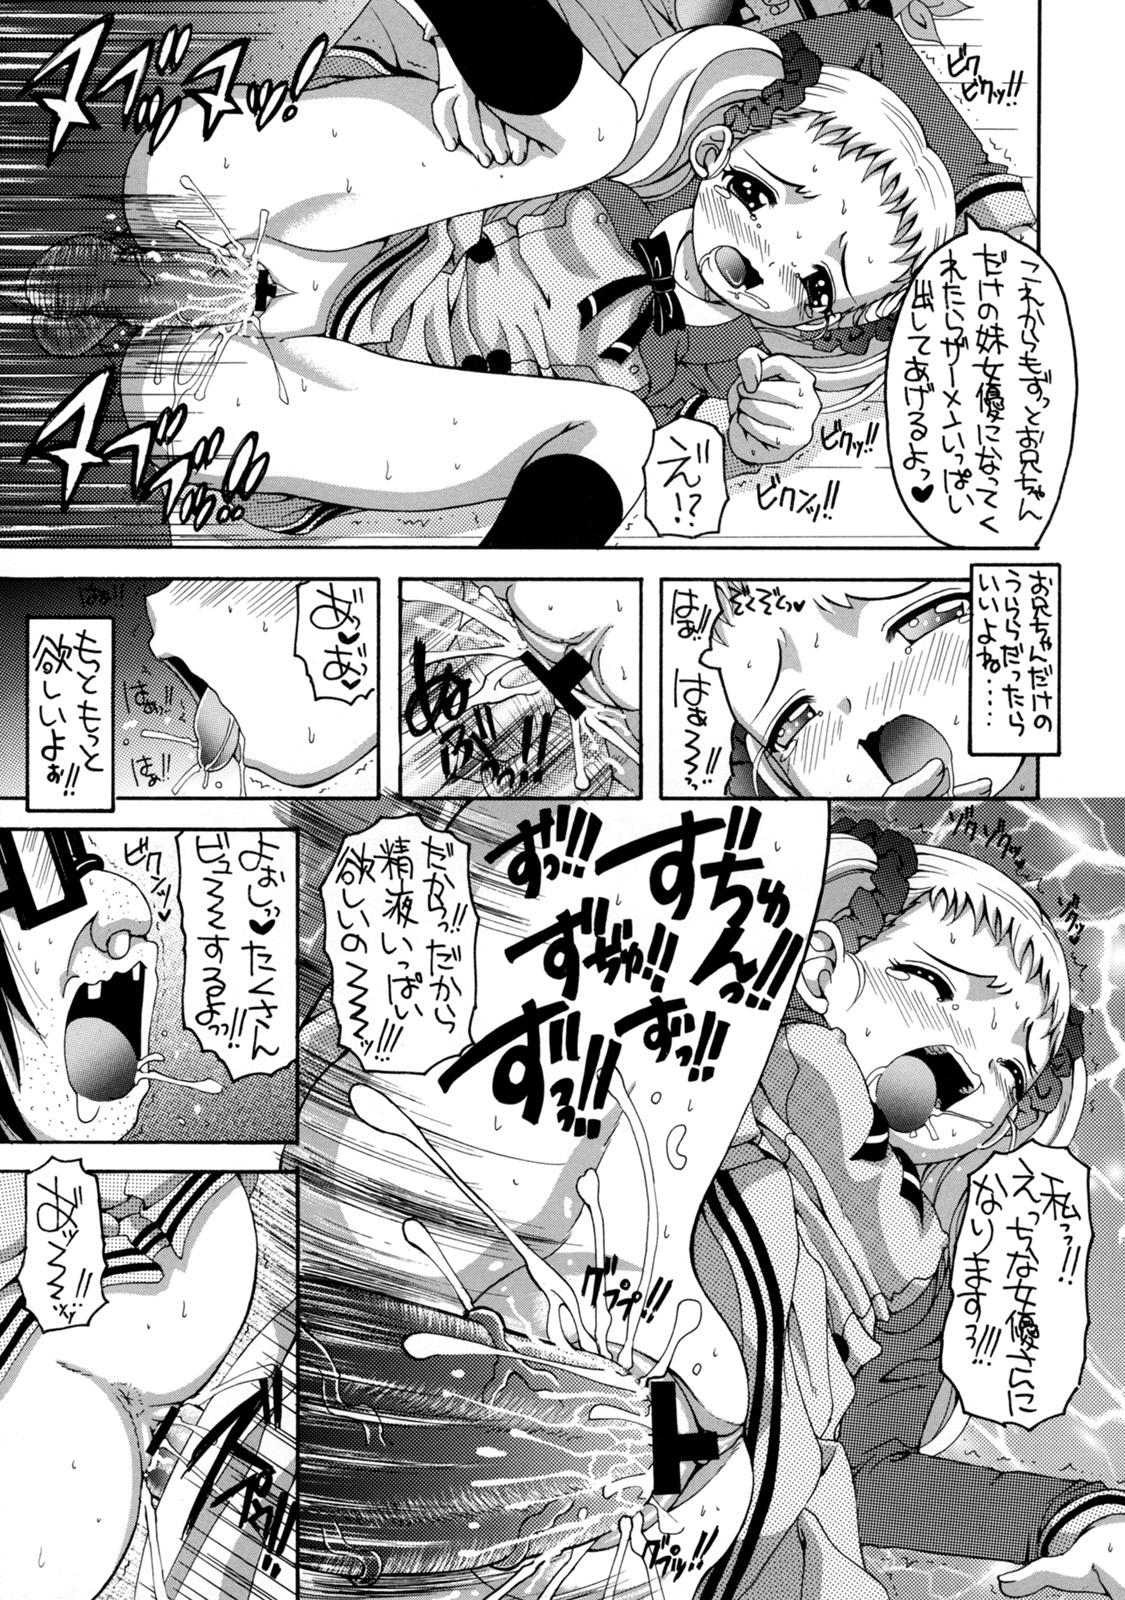 Teen Blowjob Yes! Five 3 - Pretty cure Yes precure 5 Cumming - Page 12